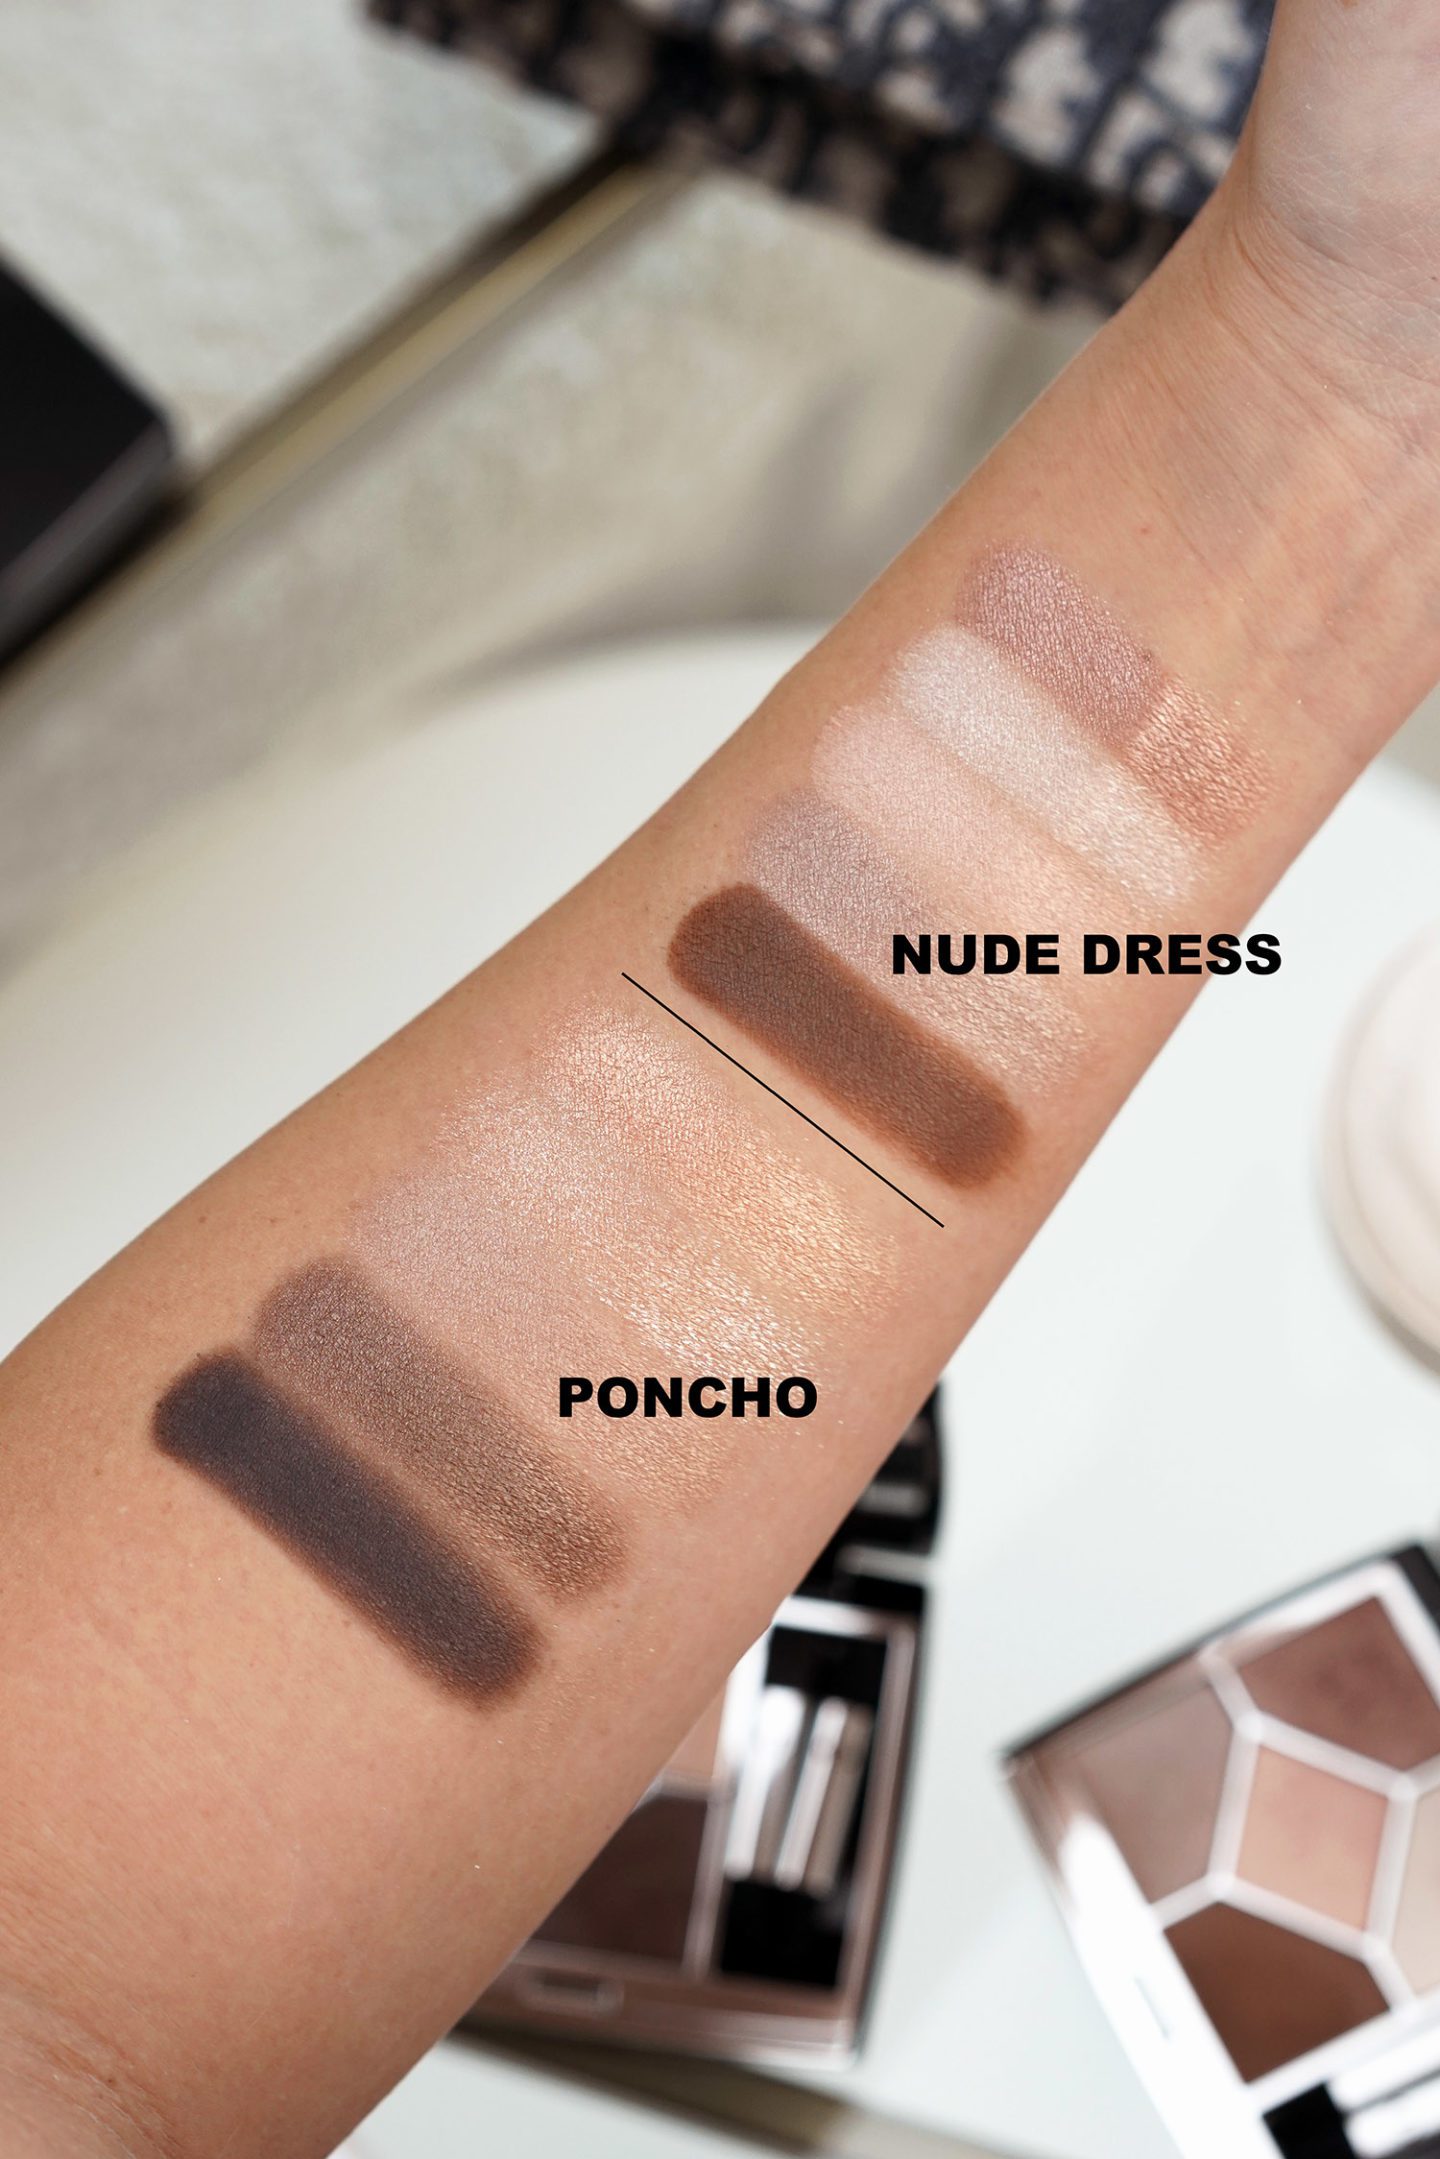 Dior 5 Couleurs Couture Eyeshadow swatches Nude Dress and Poncho